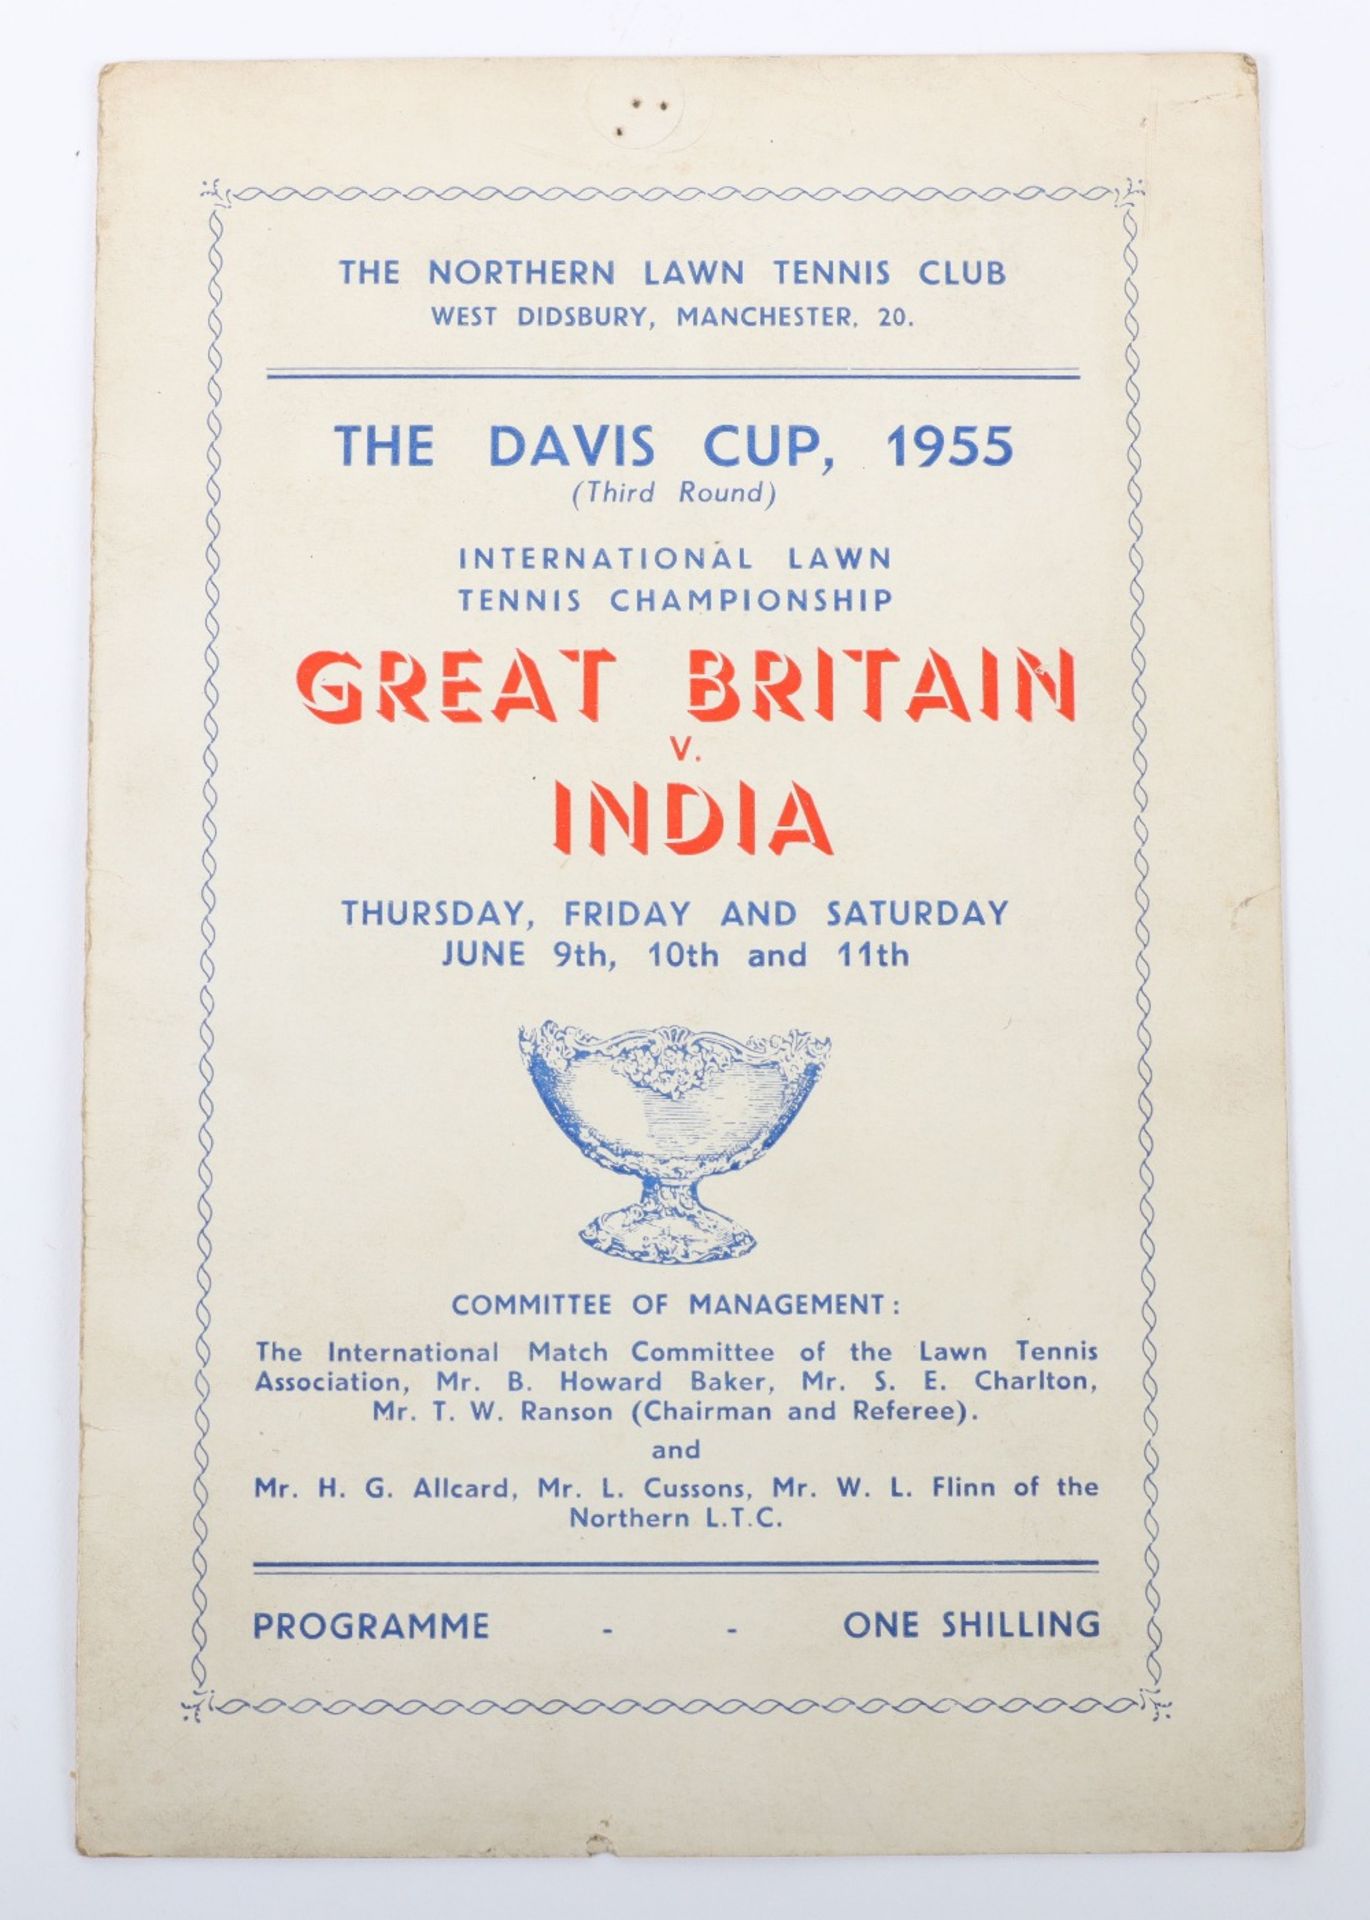 A signed Davis Cup programme of 1955 between Great Britain v India at The Northern Lawn Tennis Club